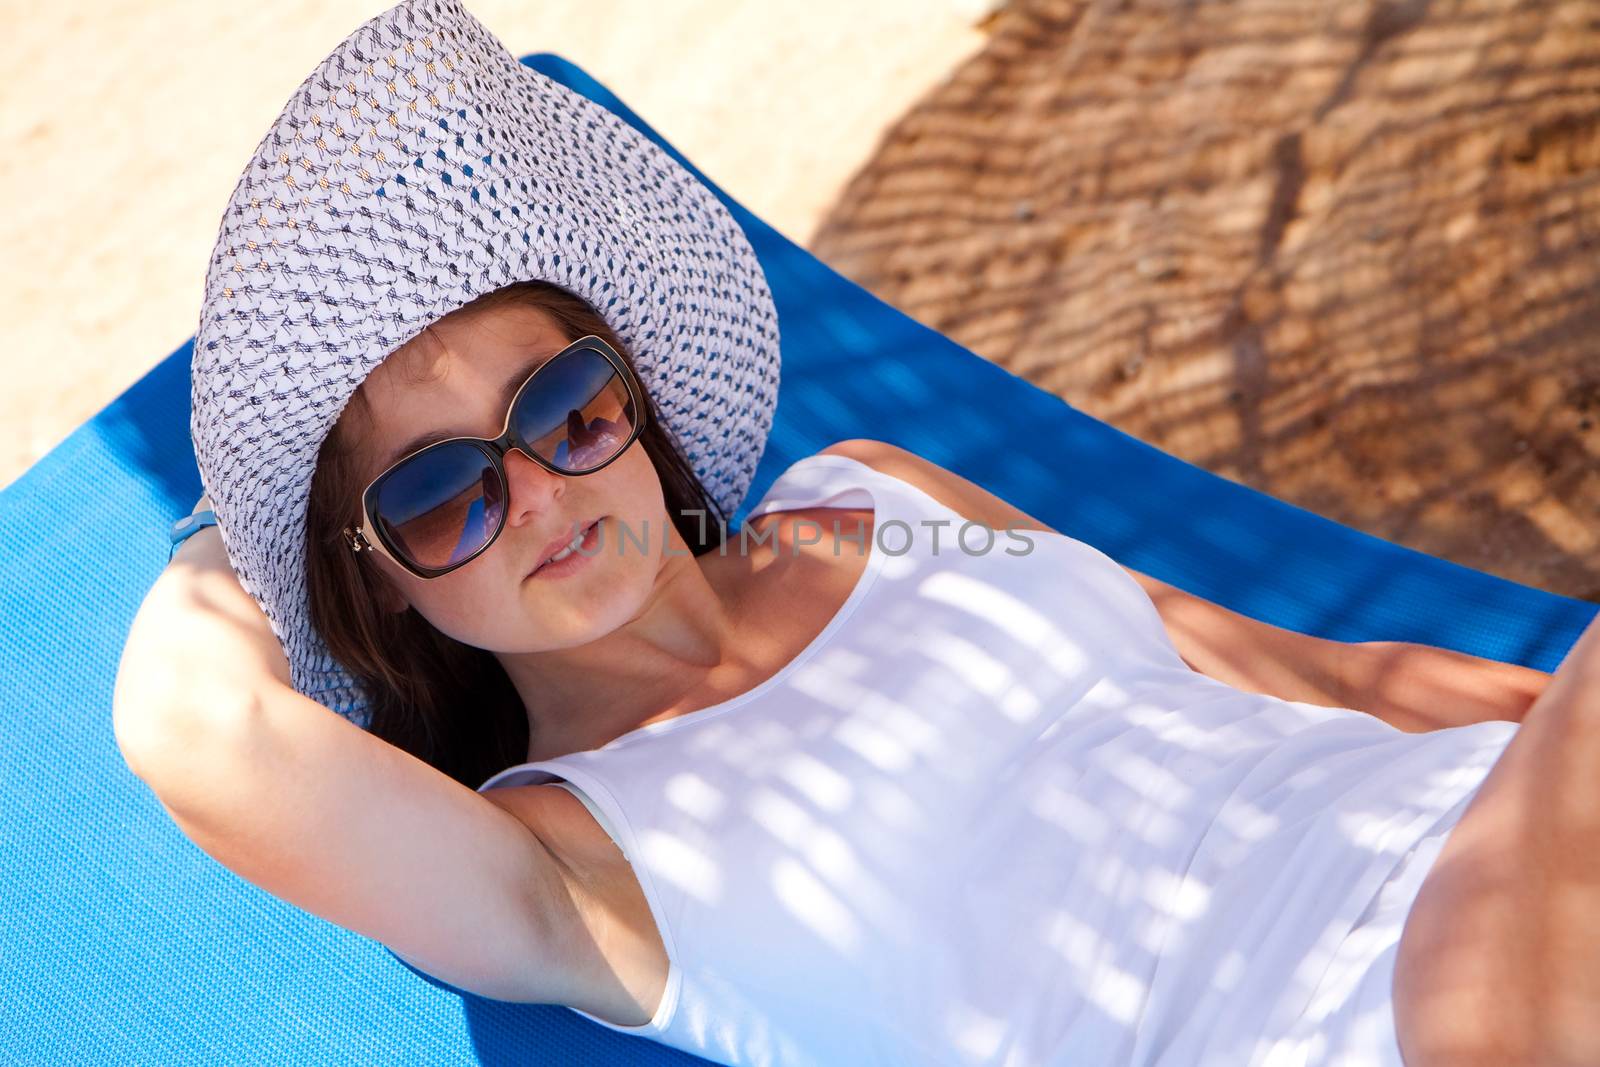 Young woman relaxes on a lounger on the beach under umbrella
